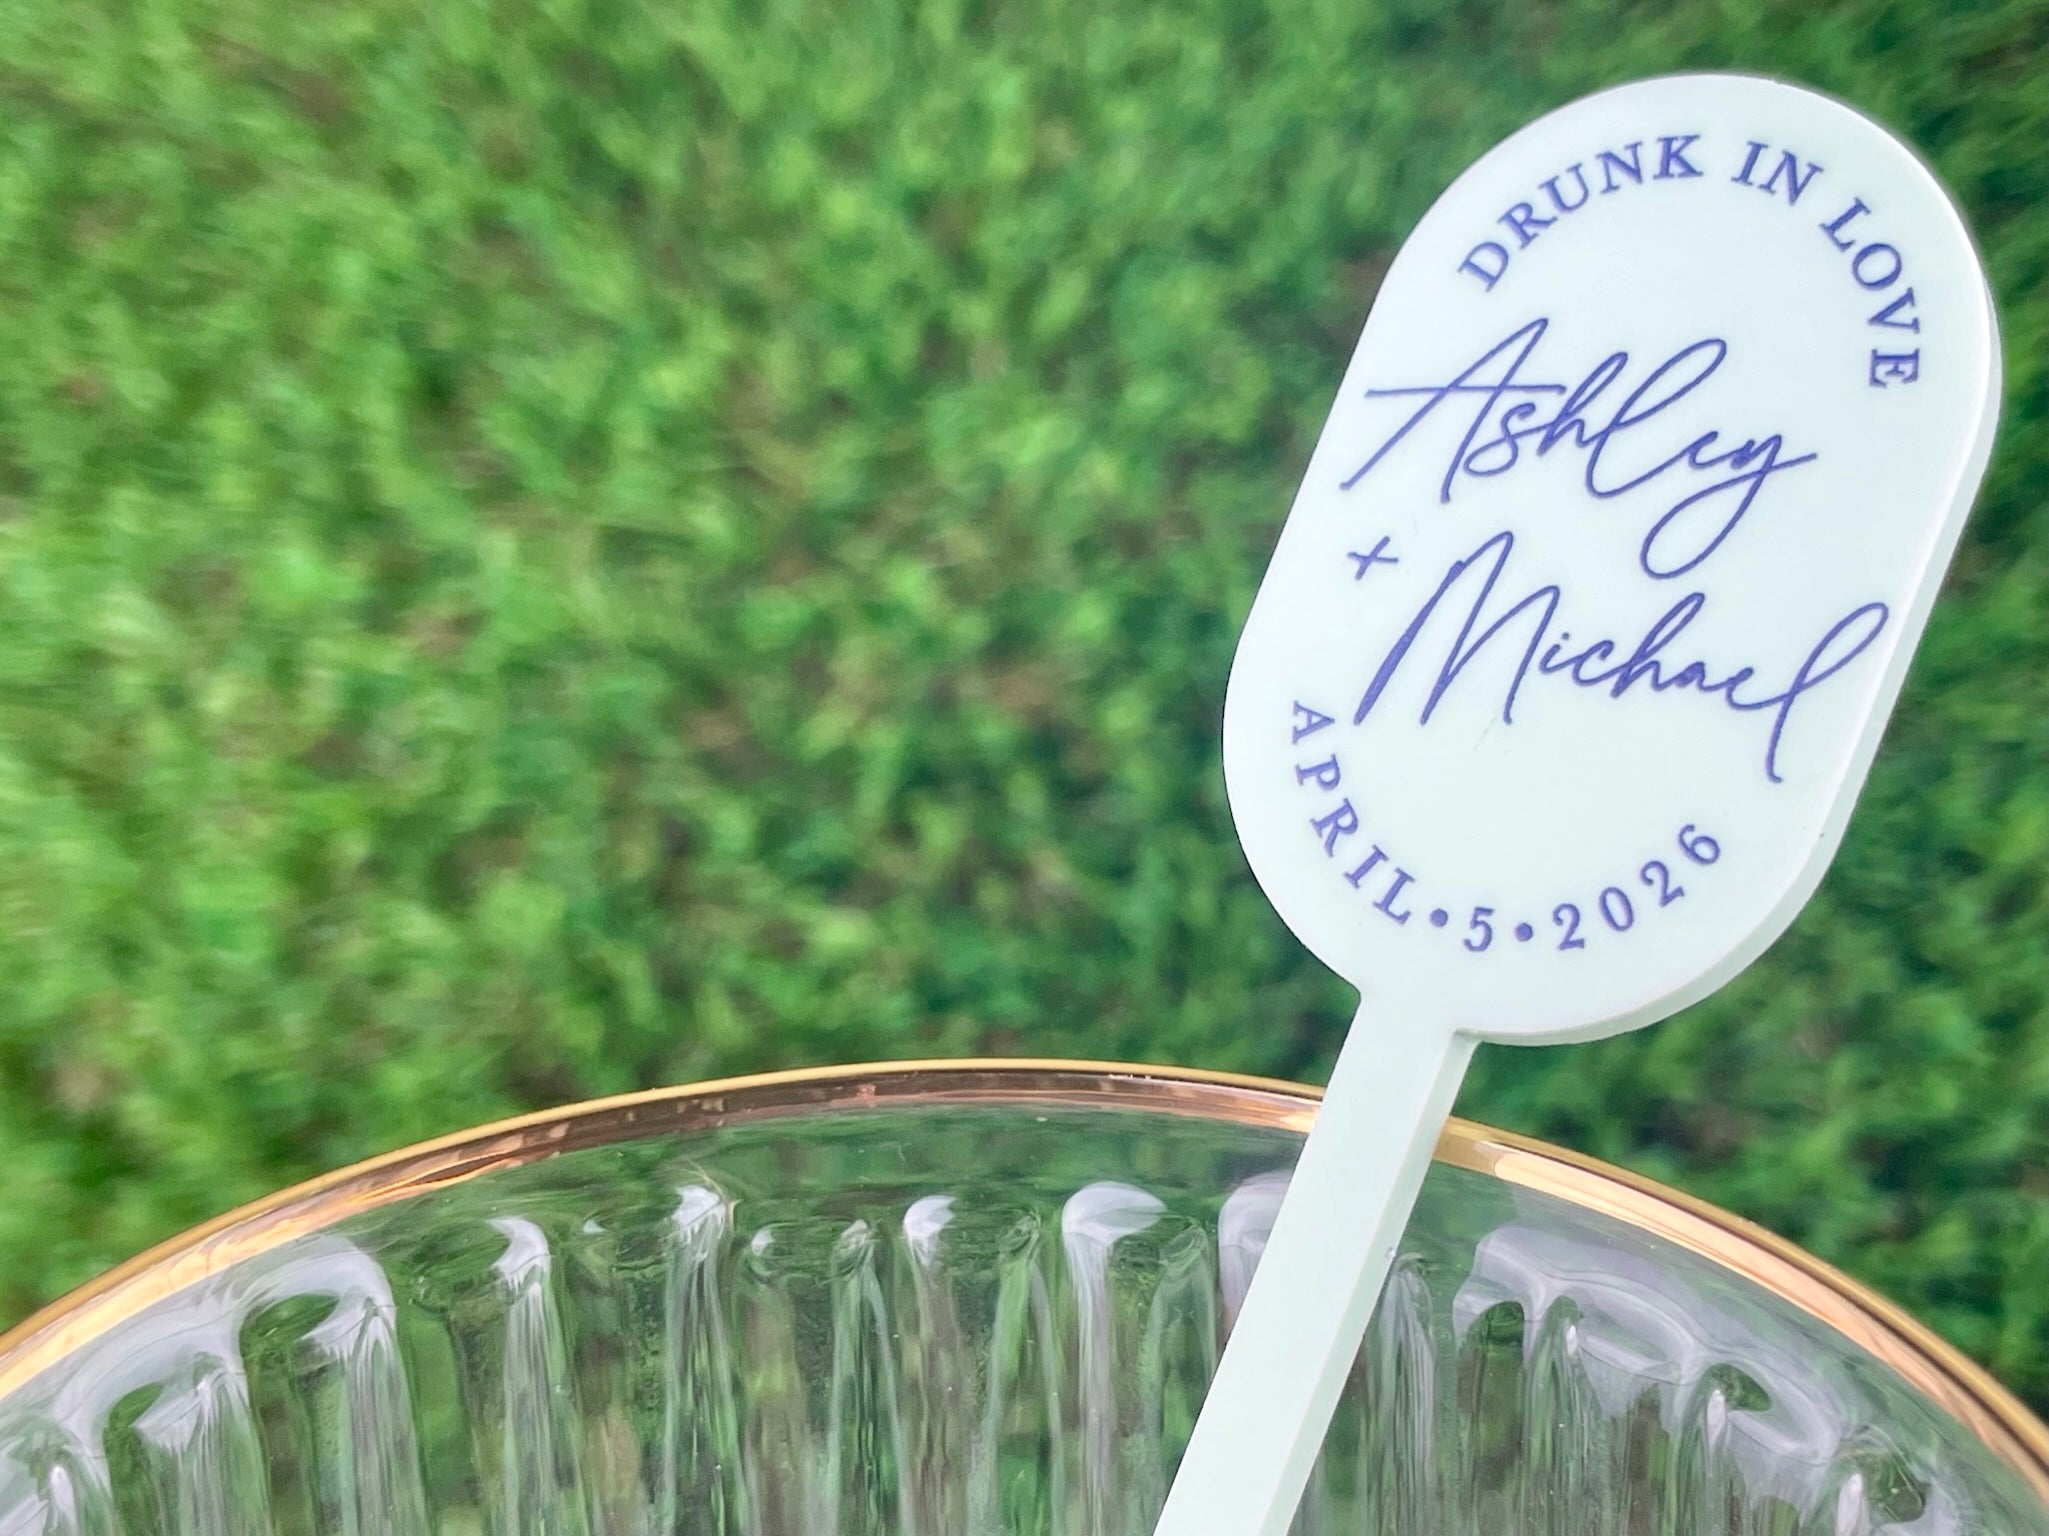 50*Personalized Engraved Round Acrylic Mirror Drink Stirrer